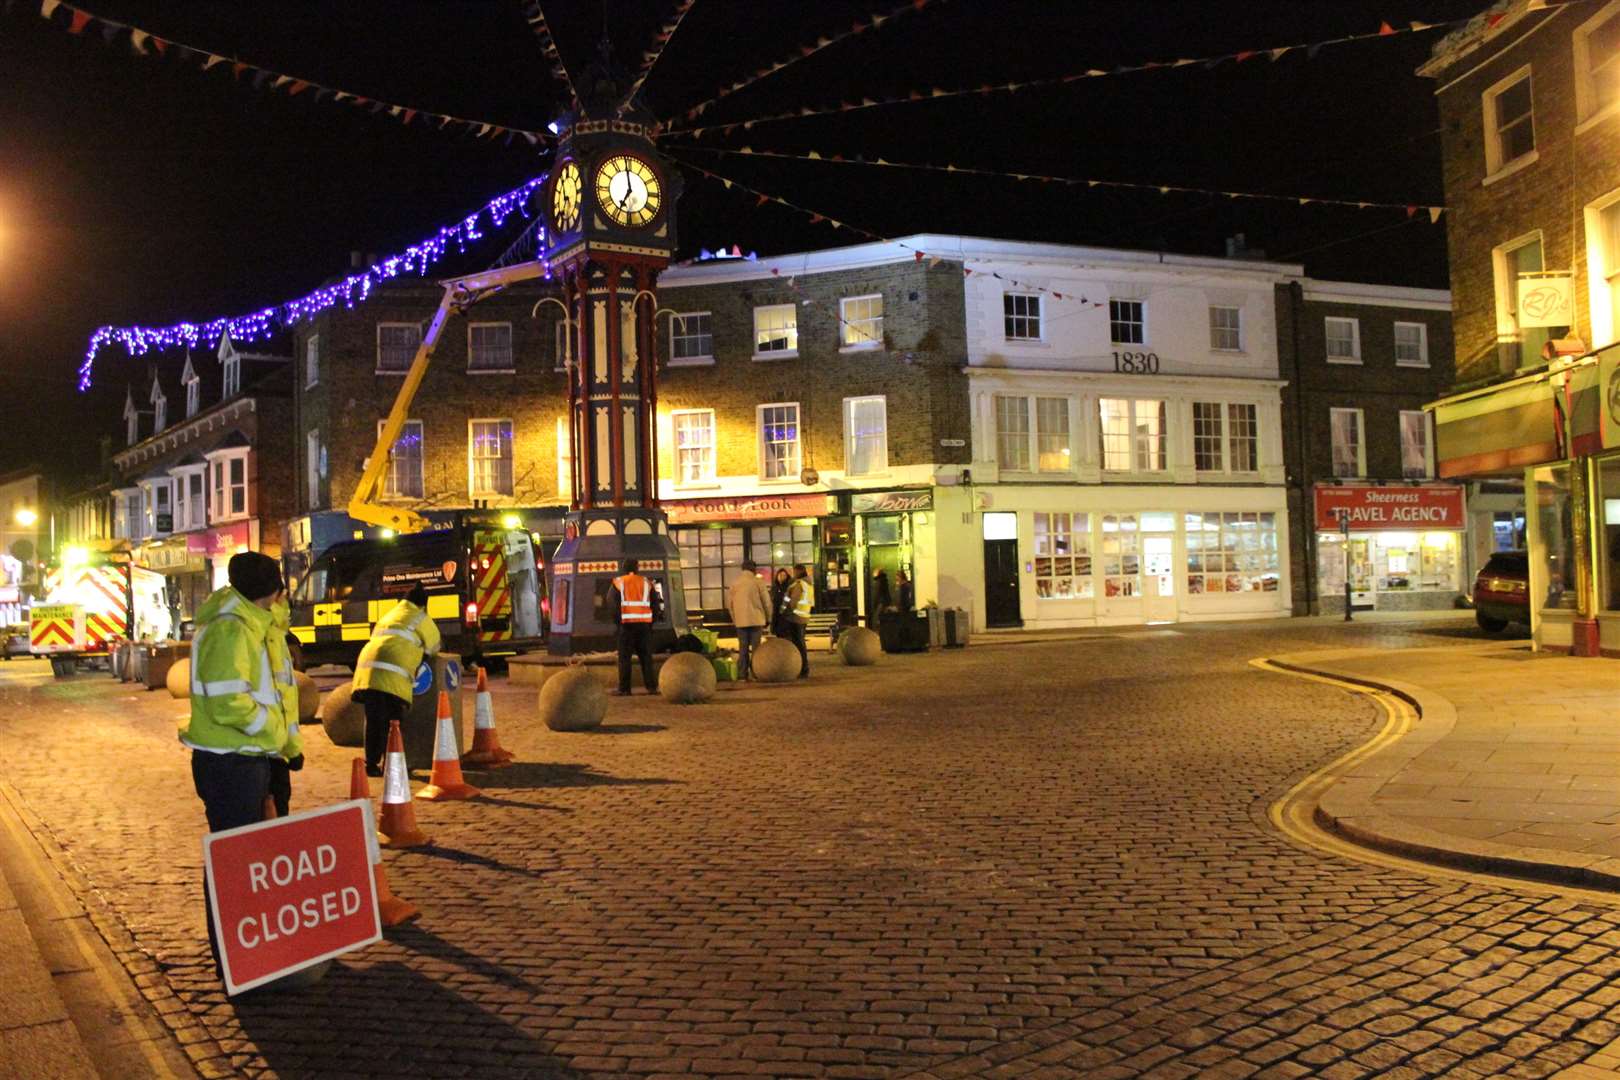 Prime One Maintenance putting up the Christmas lights in Sheerness around the clock tower Road closed